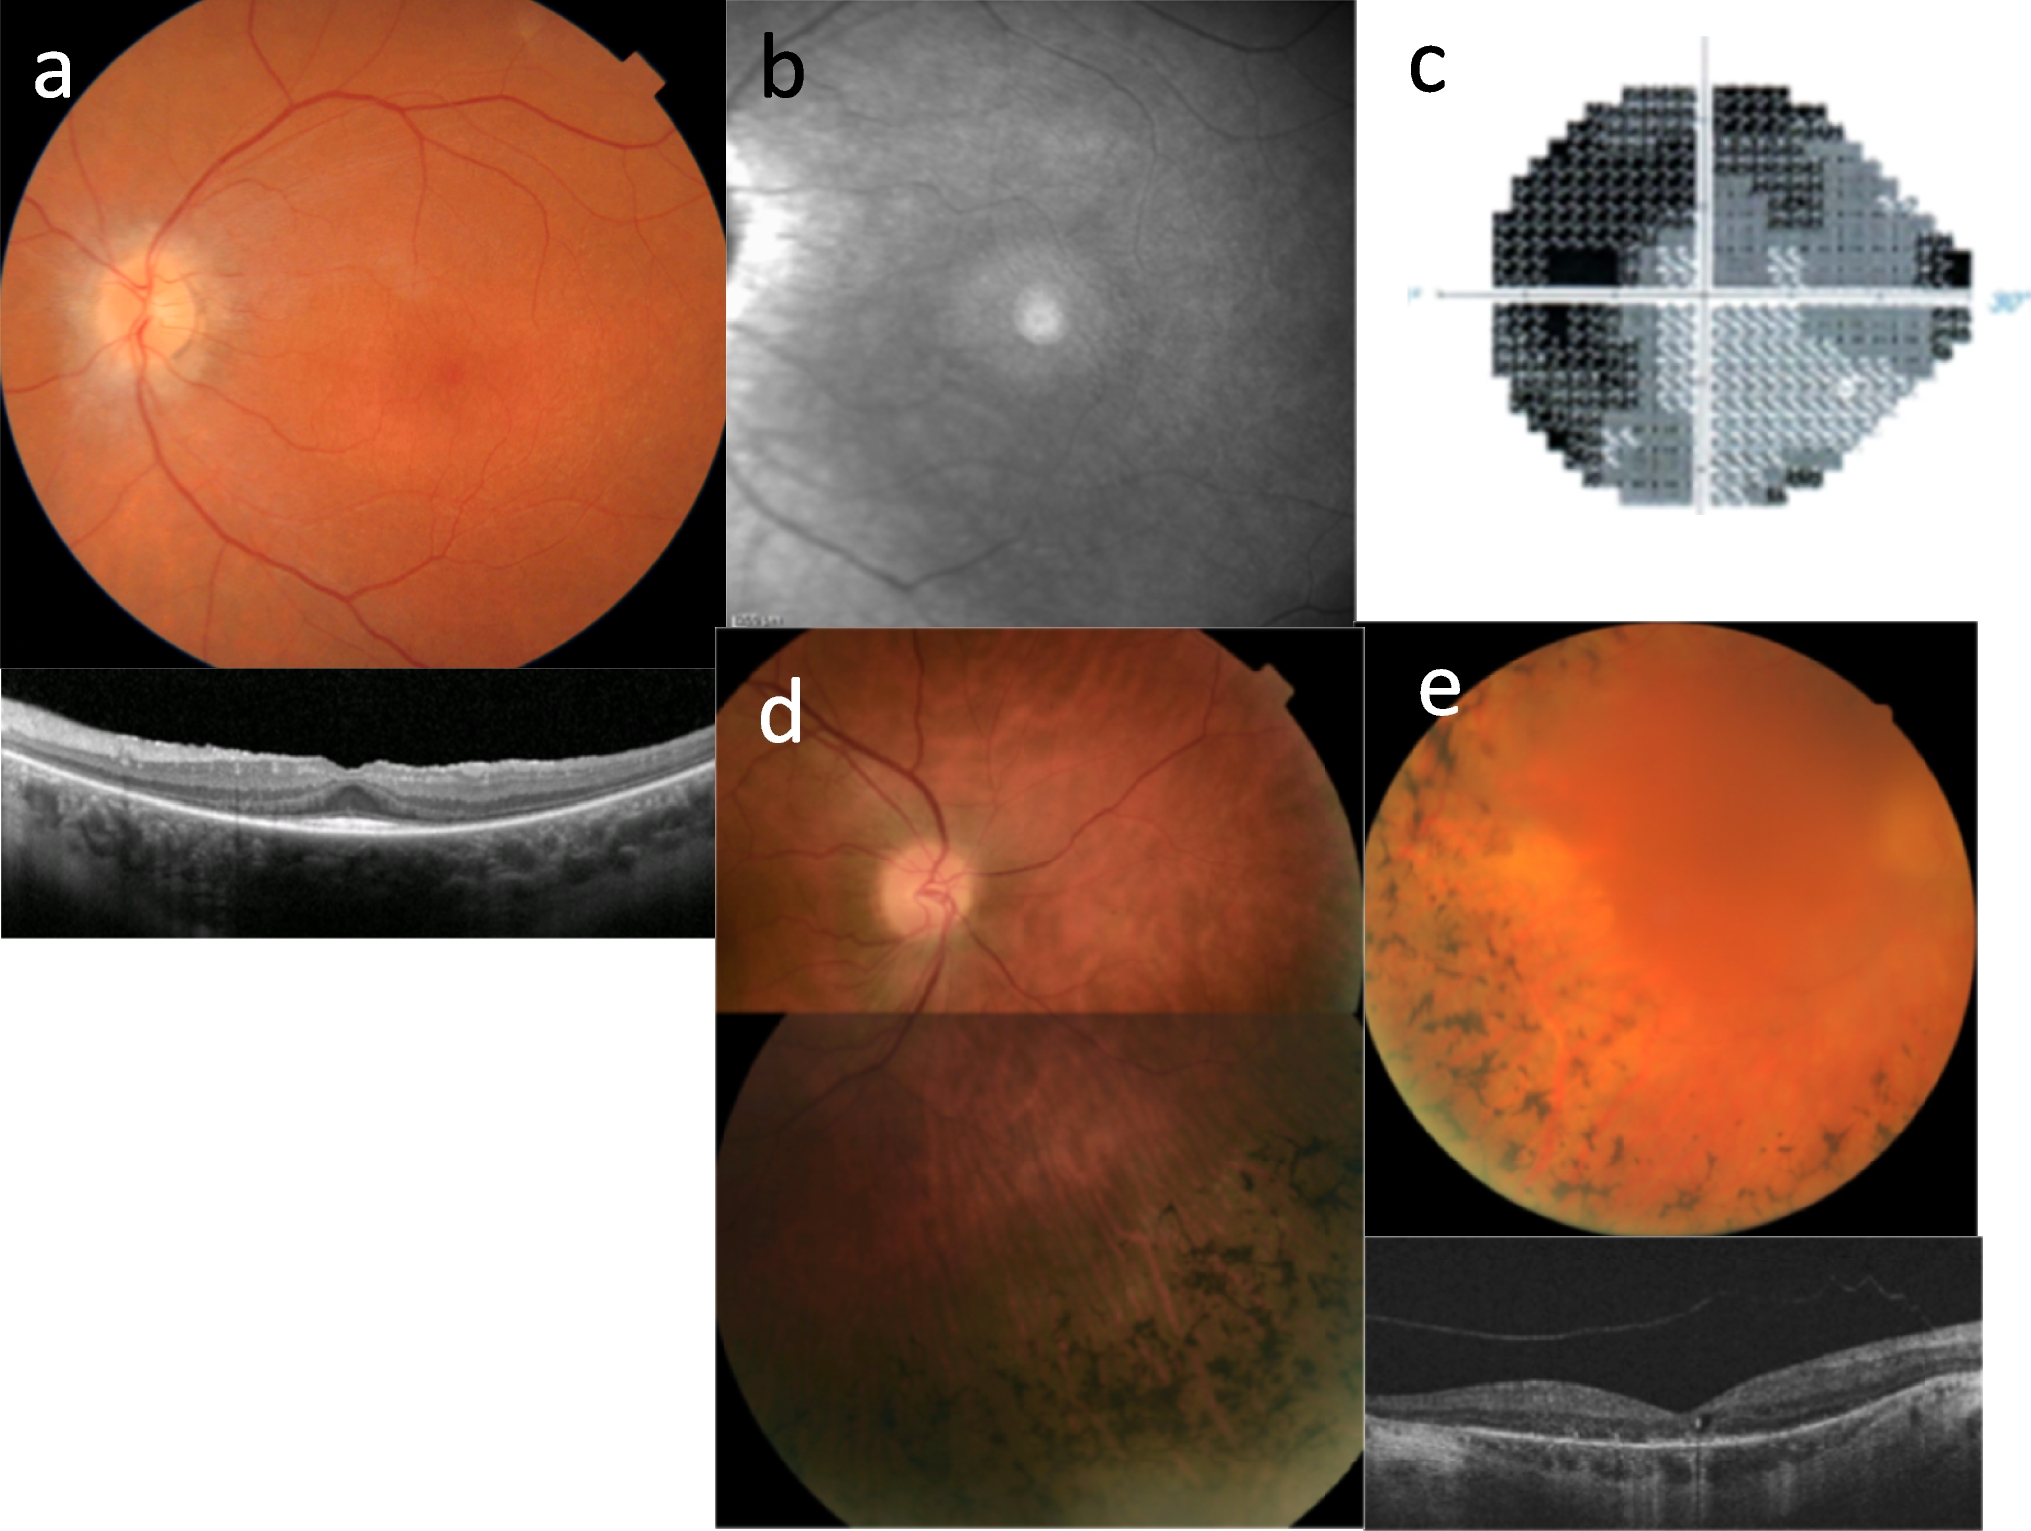 Ocular manifestations of renal ciliopathies